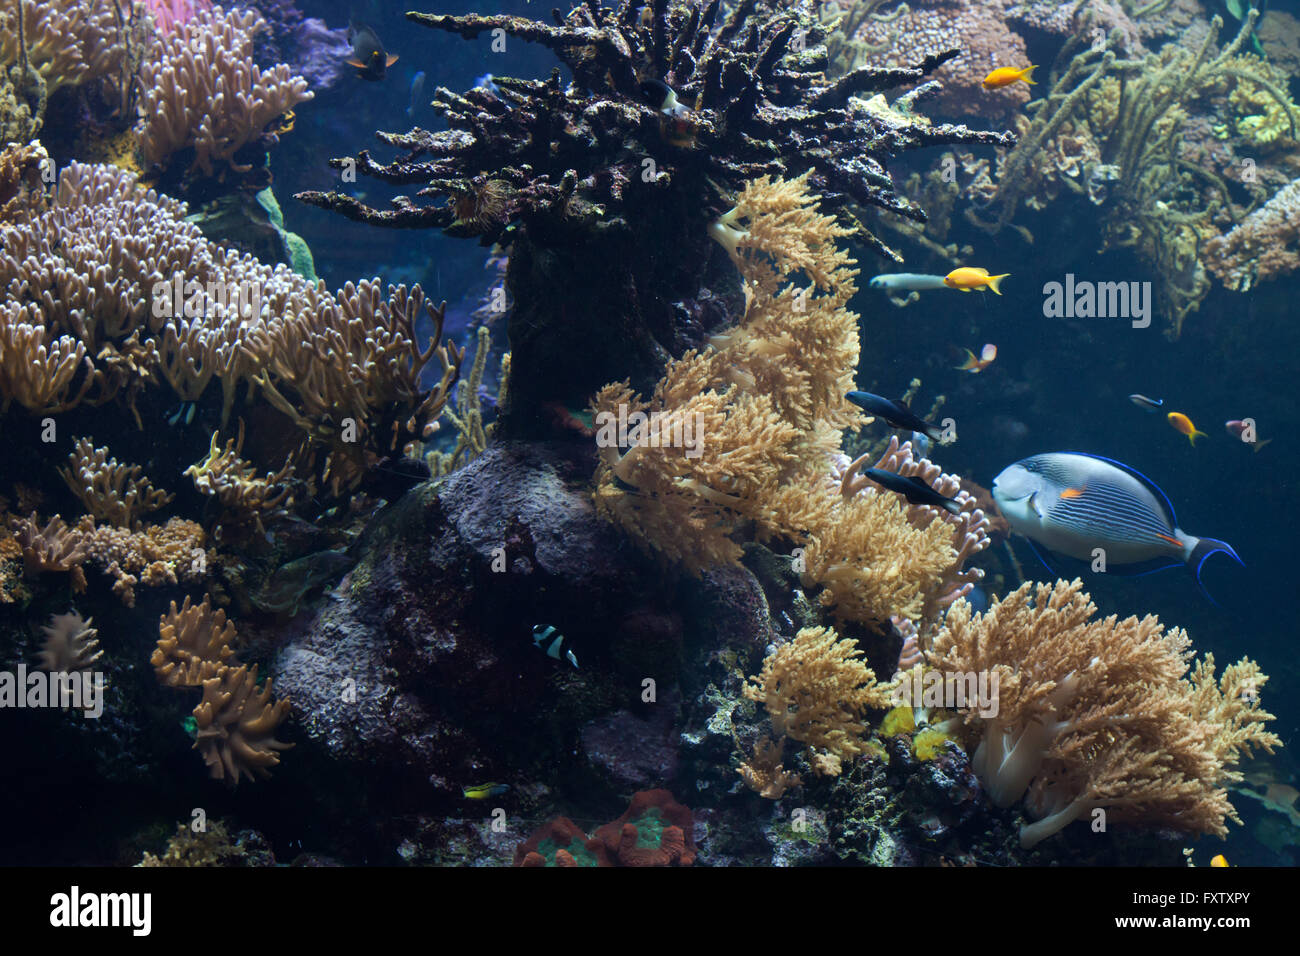 Tropical fishes swimming in the coral reef in the Genoa Aquarium in Genoa, Liguria, Italy. Stock Photo